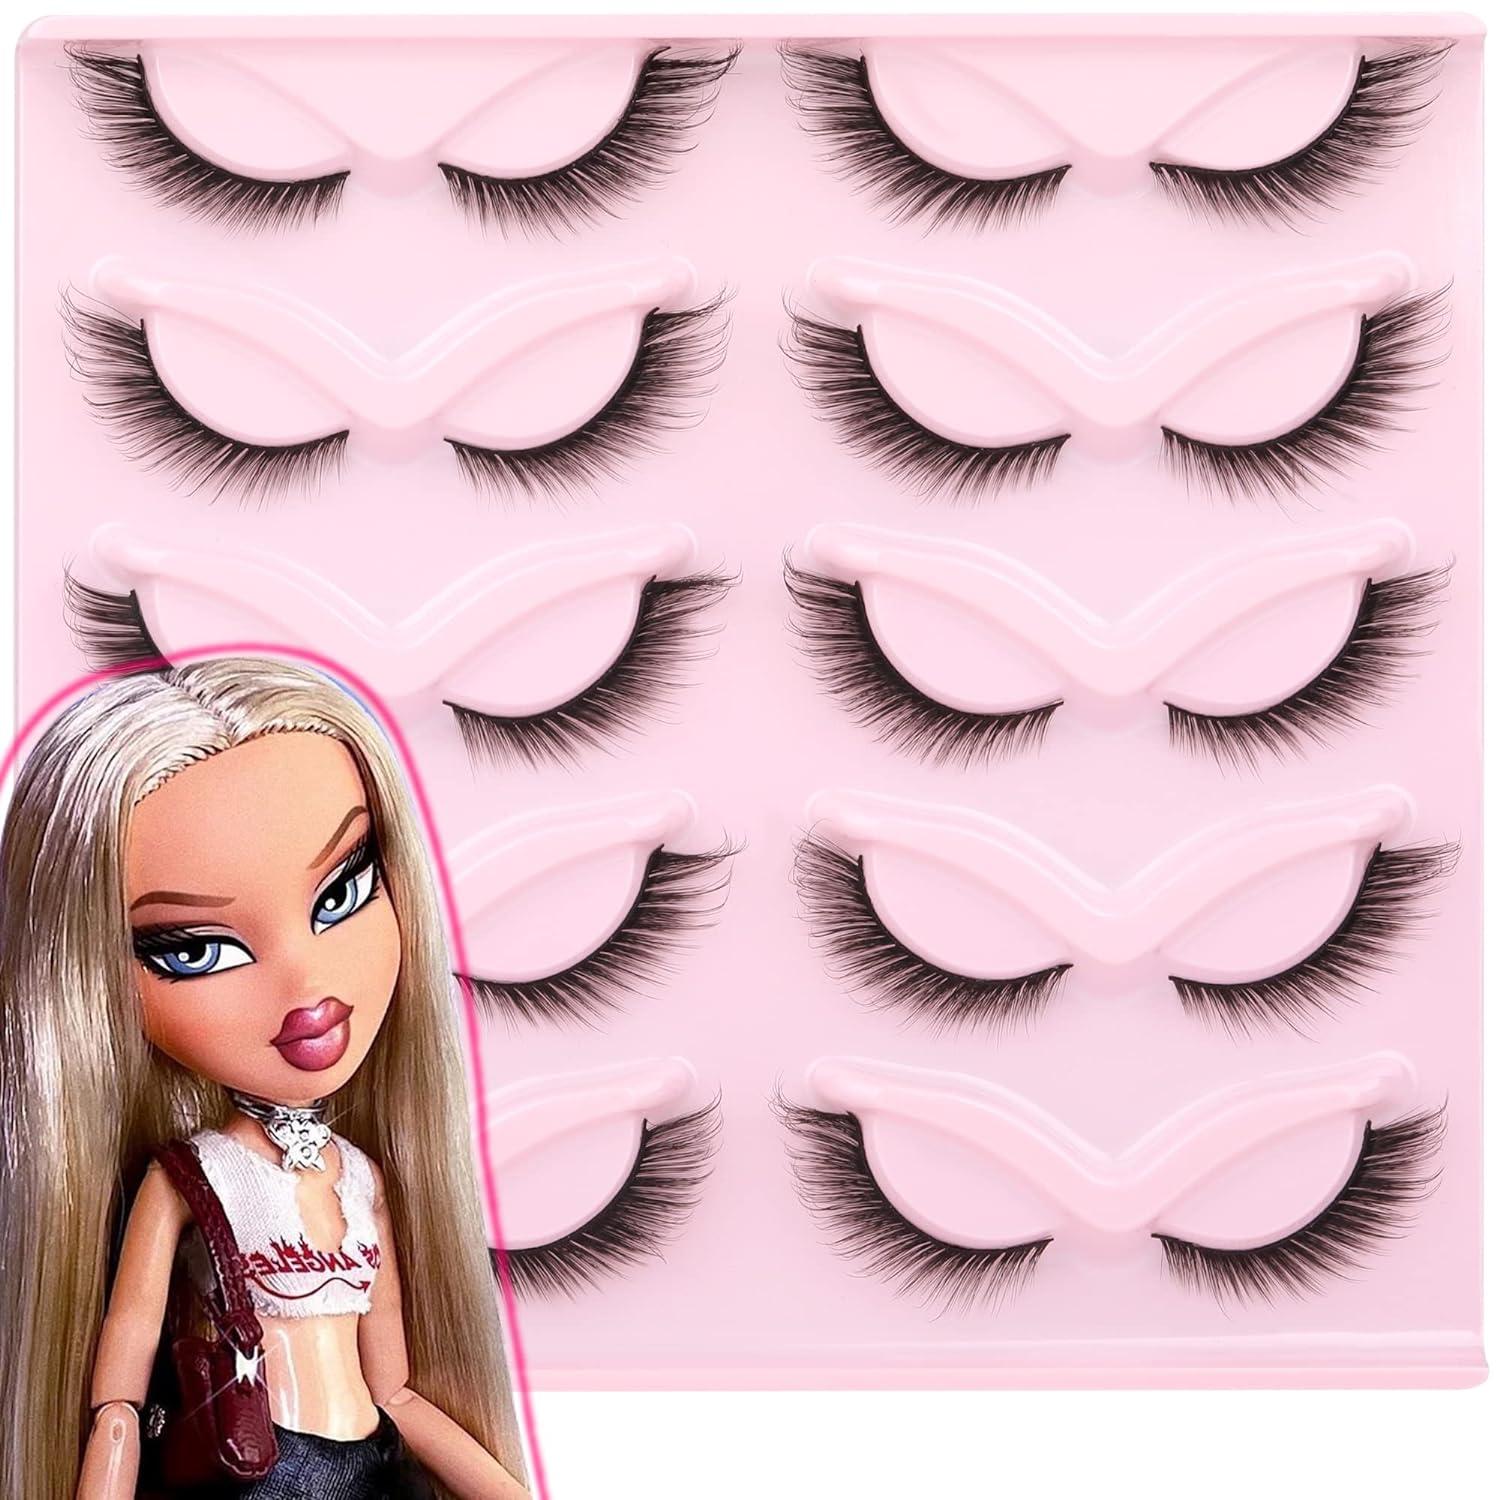 Fox Eye Lashes Angel Wing Mink Eyelashes Natural Look L Curl